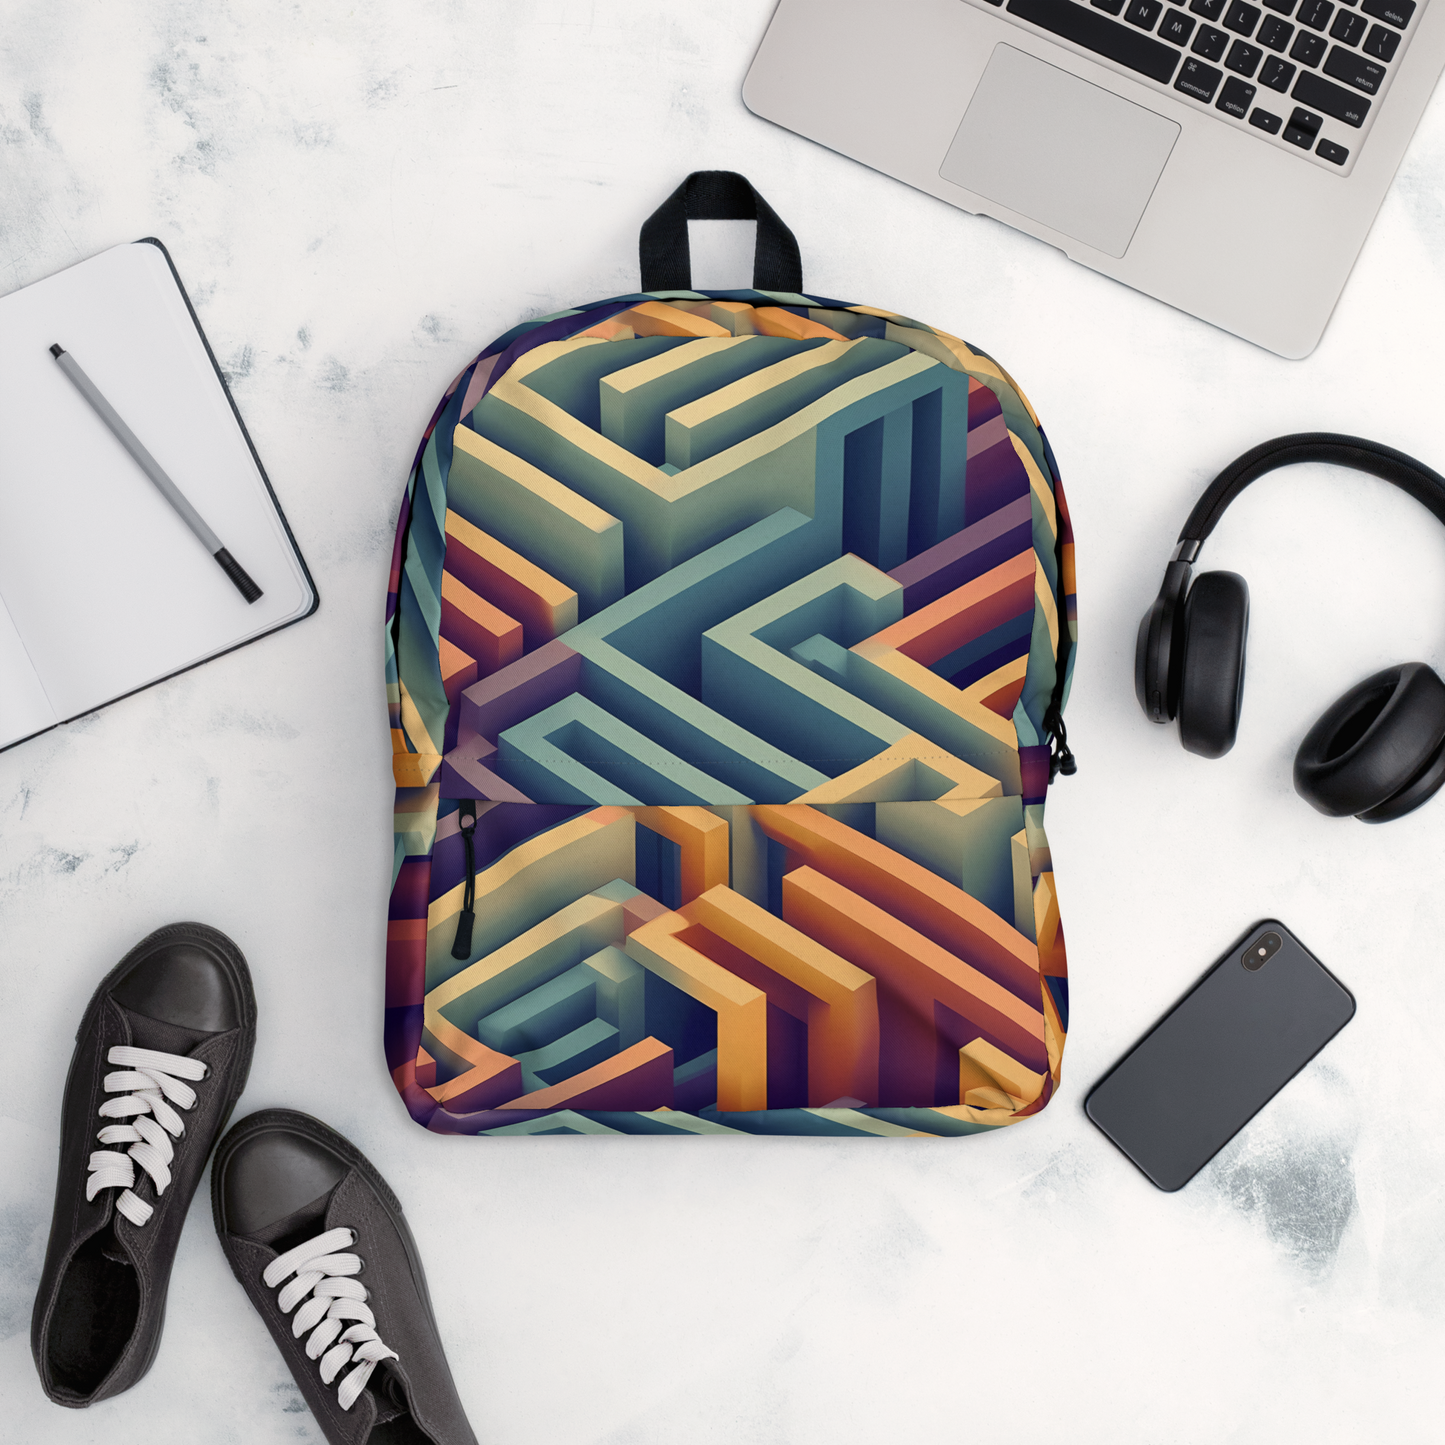 3D Maze Illusion | 3D Patterns | All-Over Print Backpack - #3